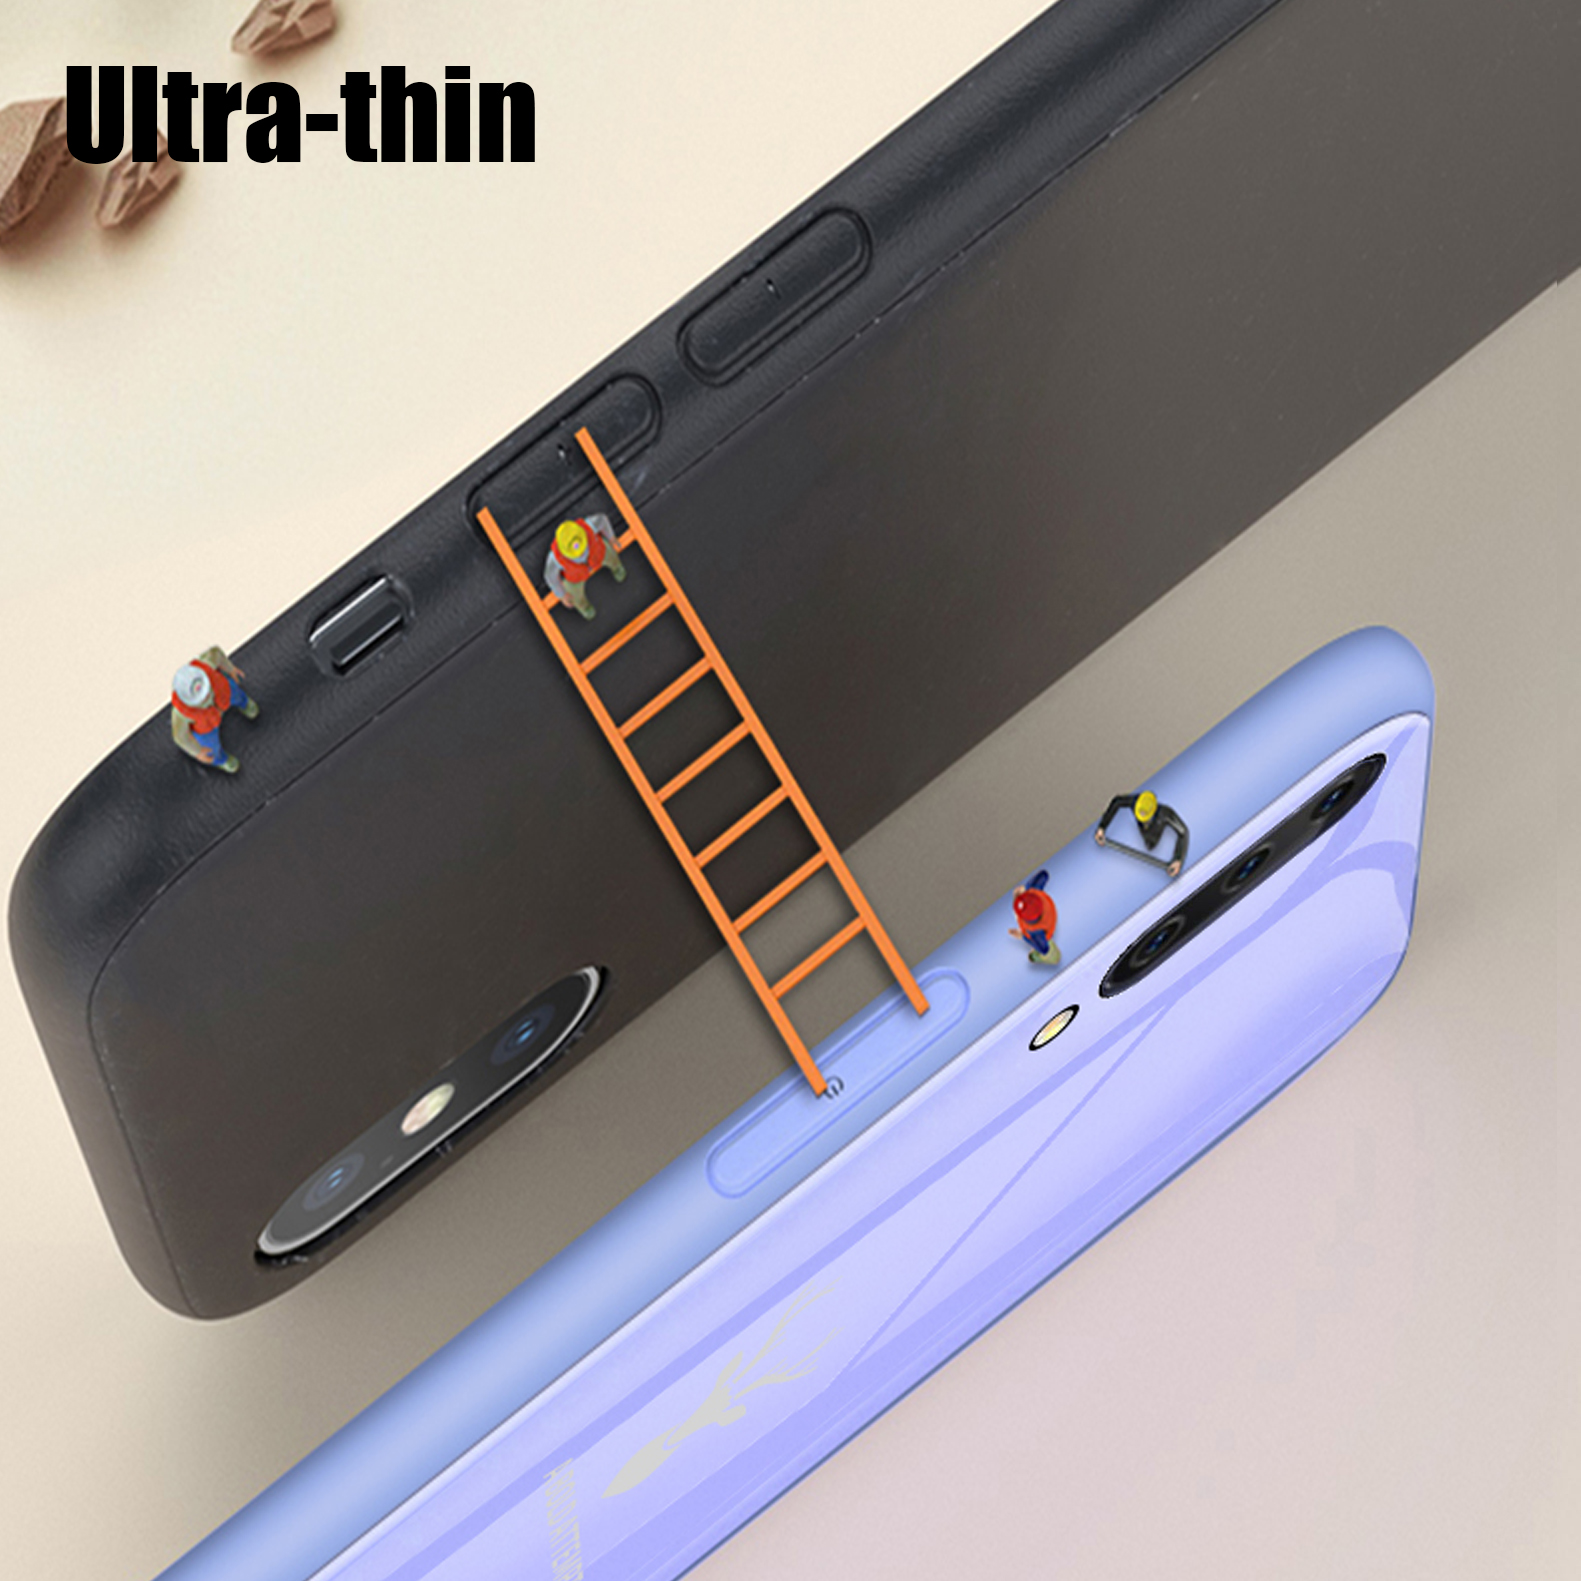 Bakeey-Tempered-Glass--Soft-Liquid-Silicone-Back-Cover-Protective-Case-For-Xiaomi-Mi-9-Lite-Xiaomi-C-1597547-5